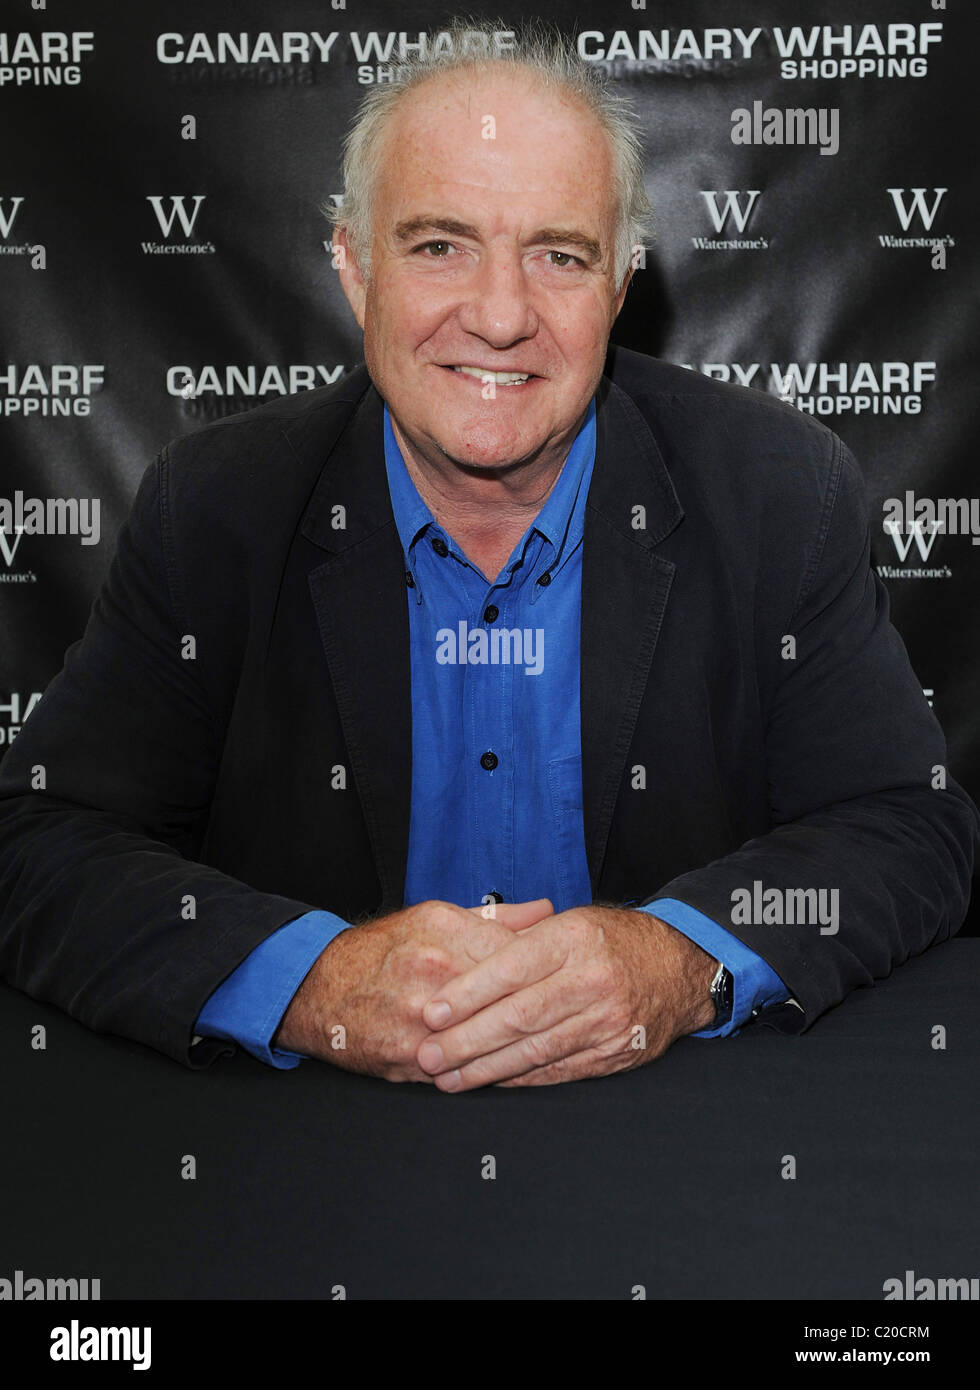 Rick Stein signs copies of his book 'Rick Stein's Far Eastern Odyssey' at Waterstones in Canary Wharf London, England - Stock Photo